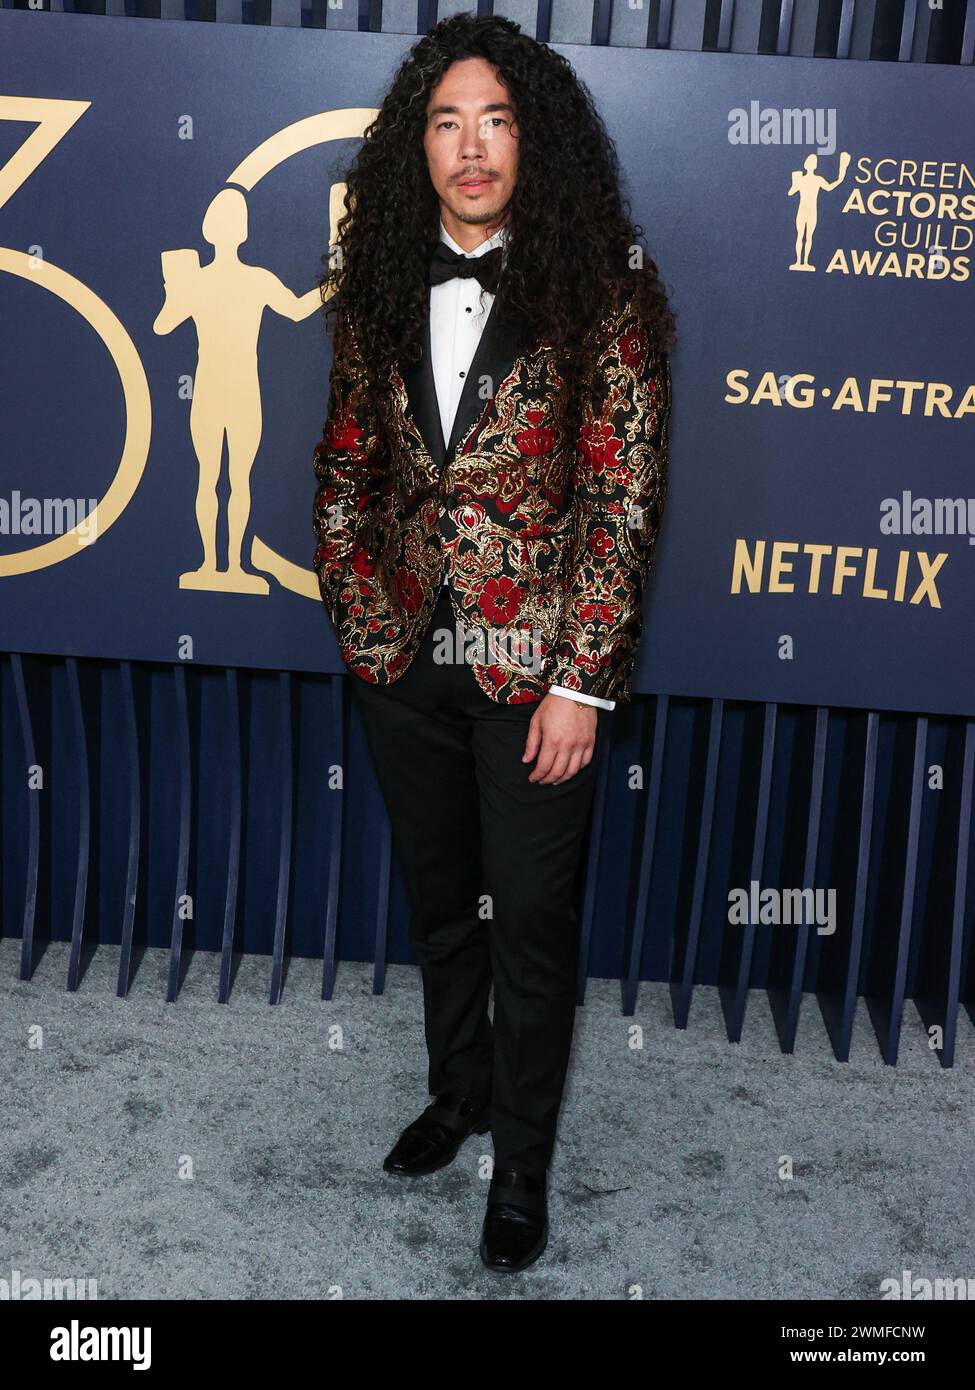 LOS ANGELES, CALIFORNIA, USA - FEBRUARY 24: Cole Walliser arrives at the 30th Annual Screen Actors Guild Awards held at the Shrine Auditorium and Expo Hall on February 24, 2024 in Los Angeles, California, United States. (Photo by Xavier Collin/Image Press Agency) Stock Photo